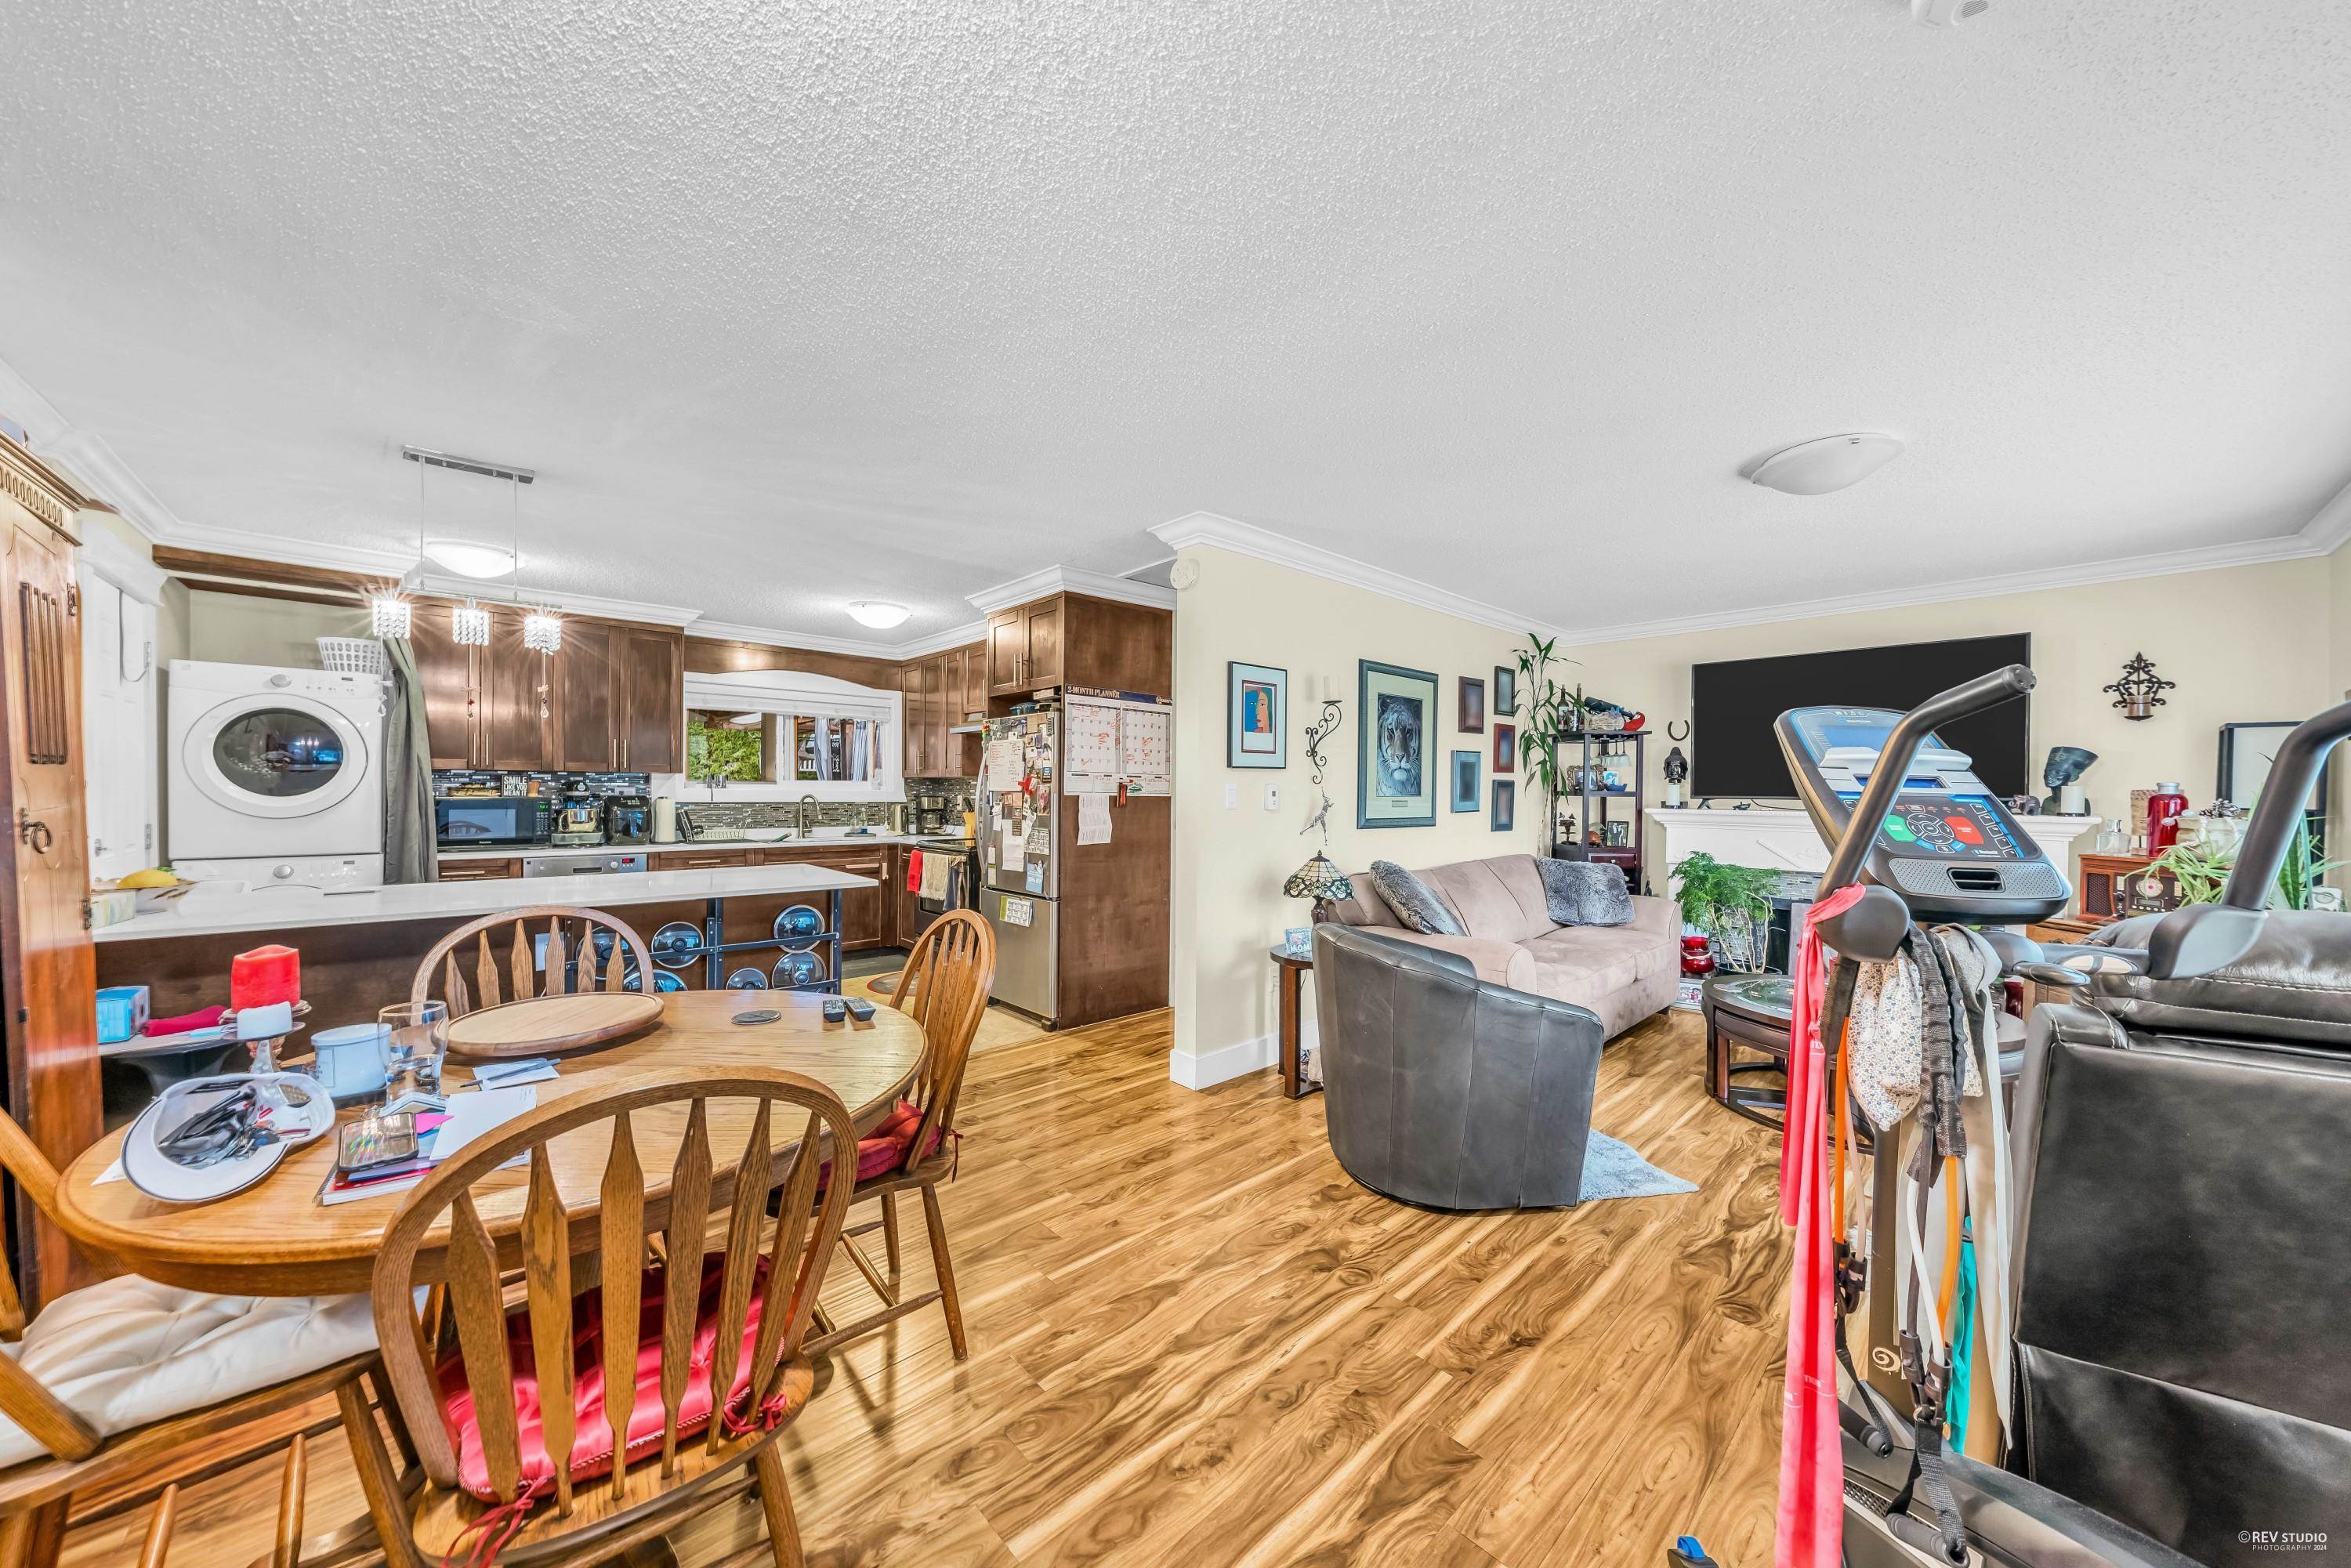 Listing image of 1219 SILVERWOOD CRESCENT